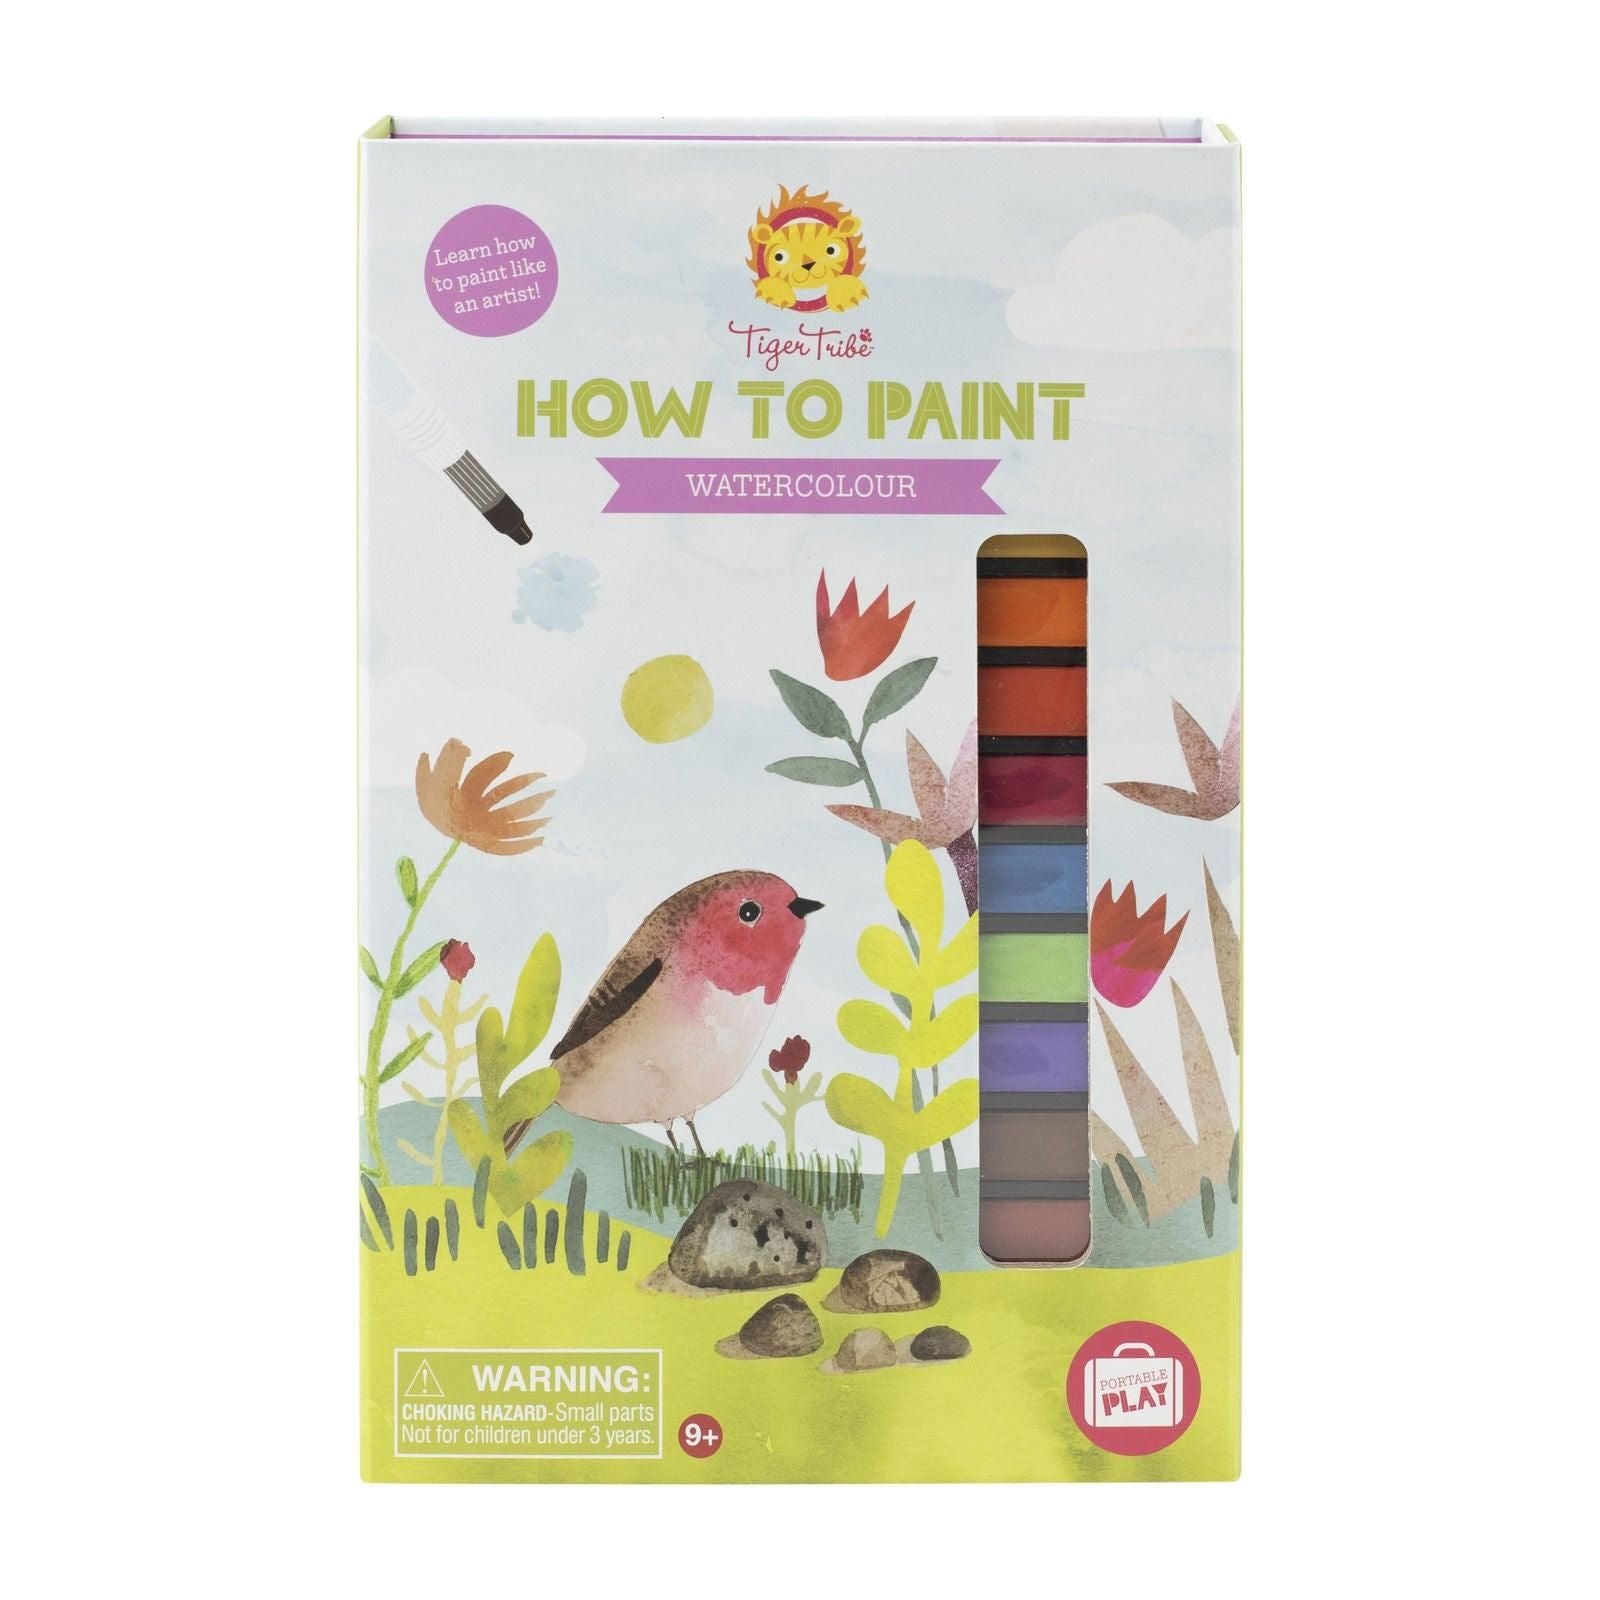 How to Paint - Watercolour - Toybox Tales